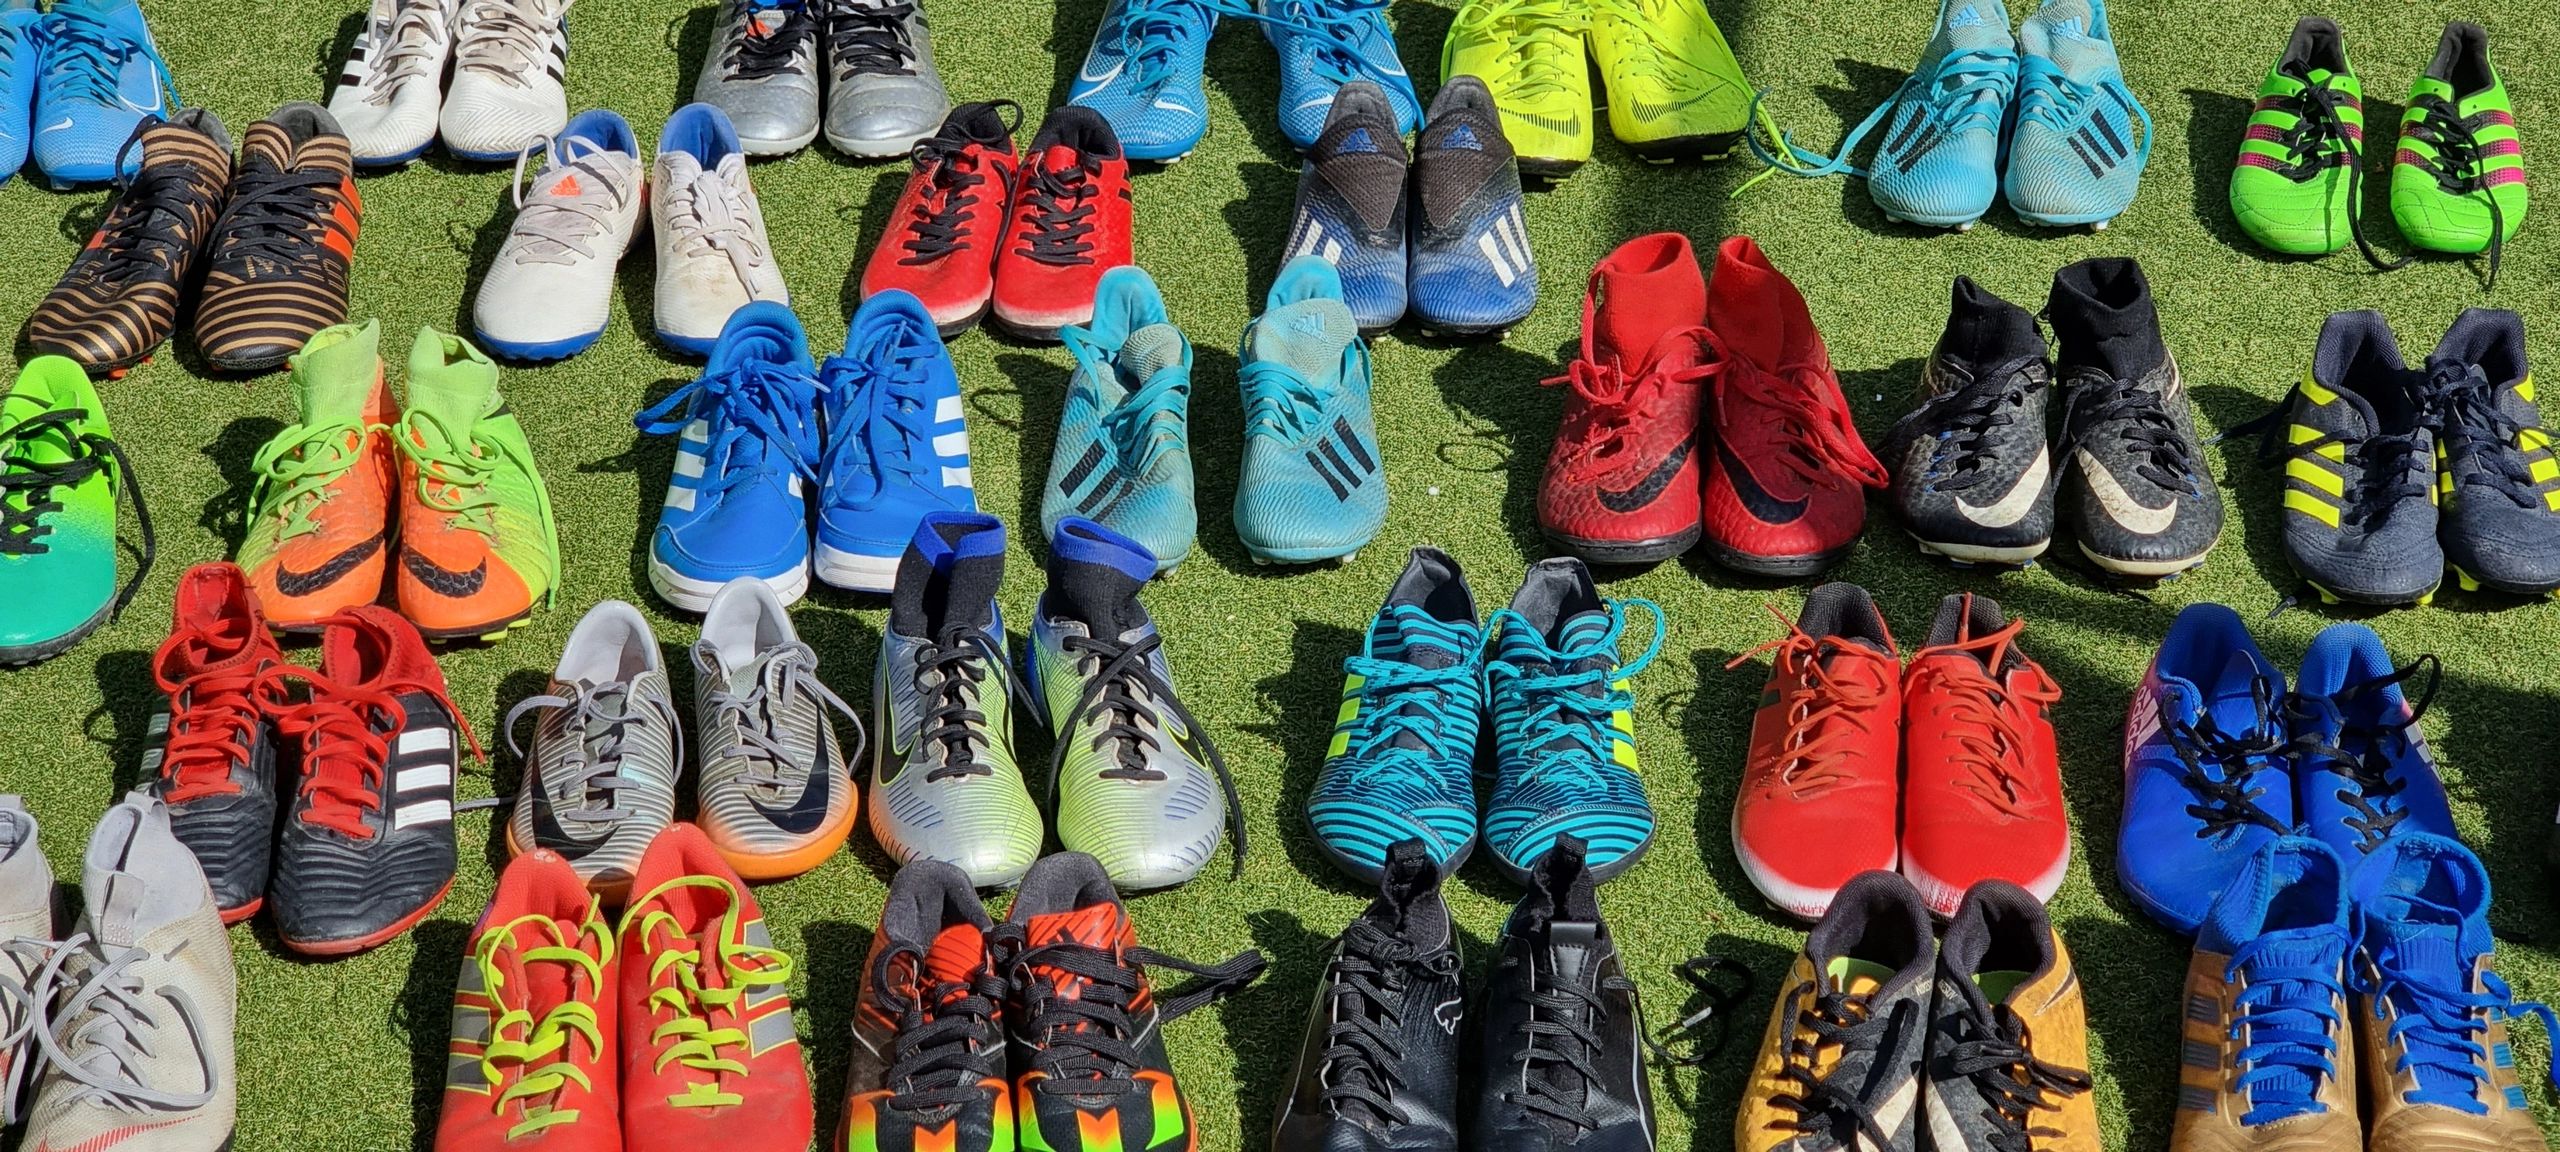 Reciclar articulo Ministro Basingstoke Boot Room - Used Football Boots, Cheap Boots, Shoe Store